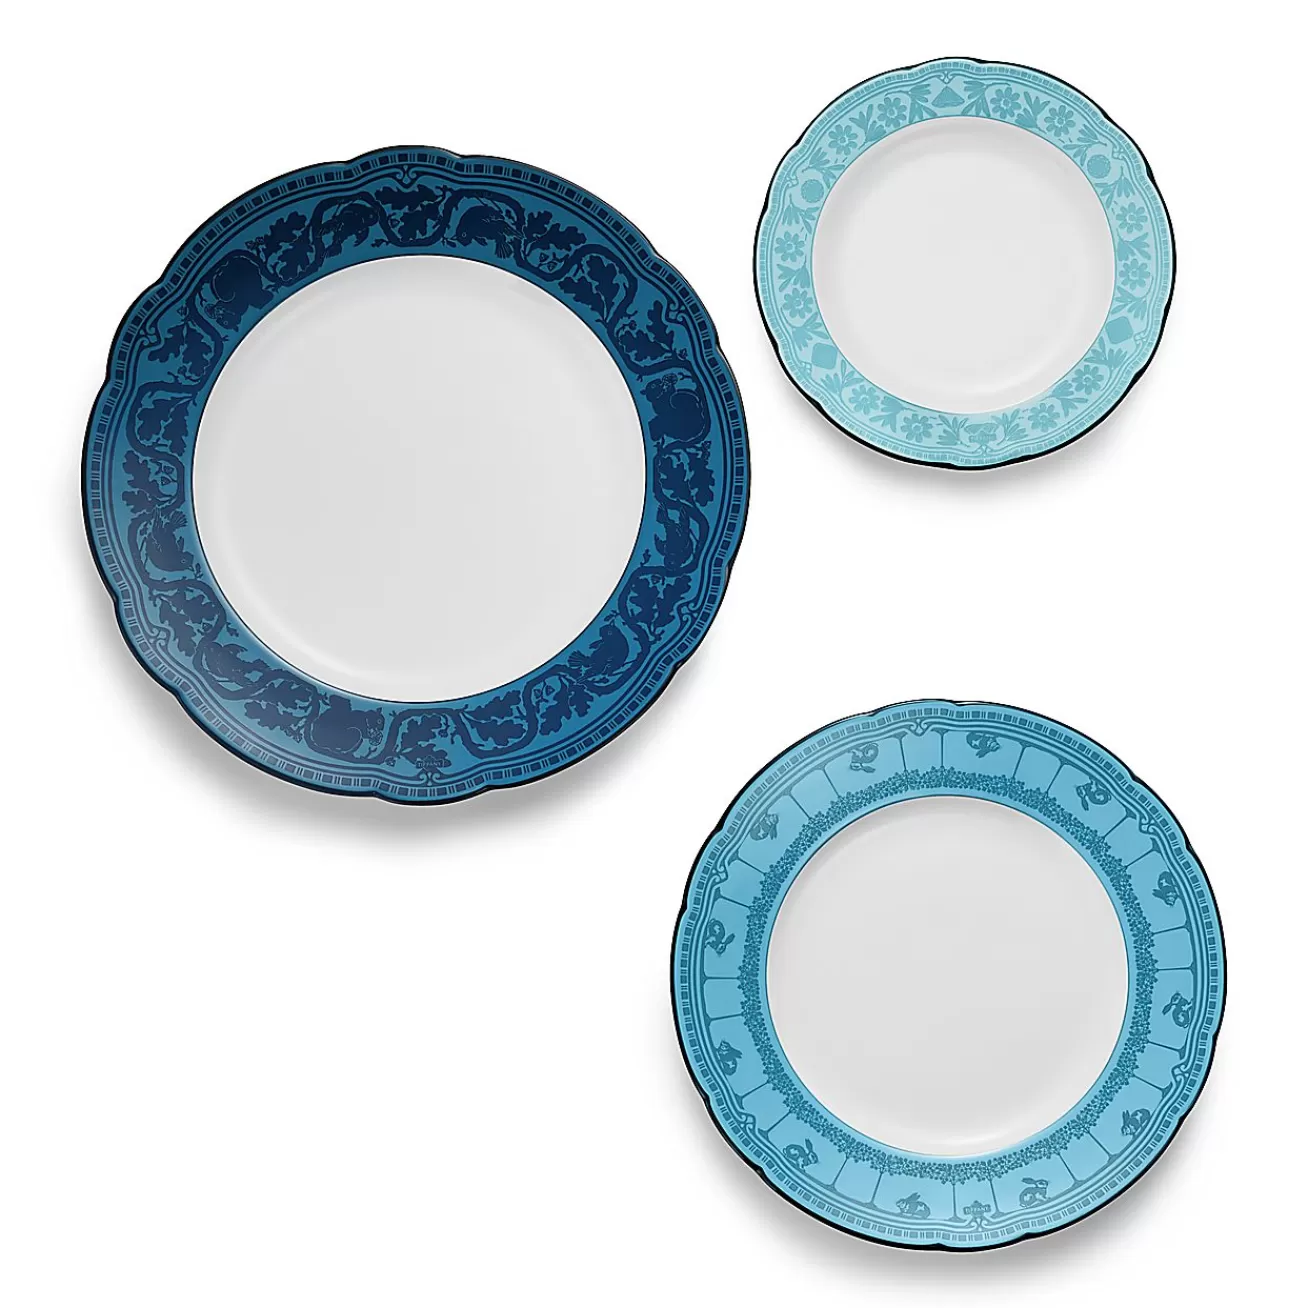 Tiffany & Co. Tiffany Heritage Plates Set of Three, in Blue Porcelain | ^ The Home | Housewarming Gifts